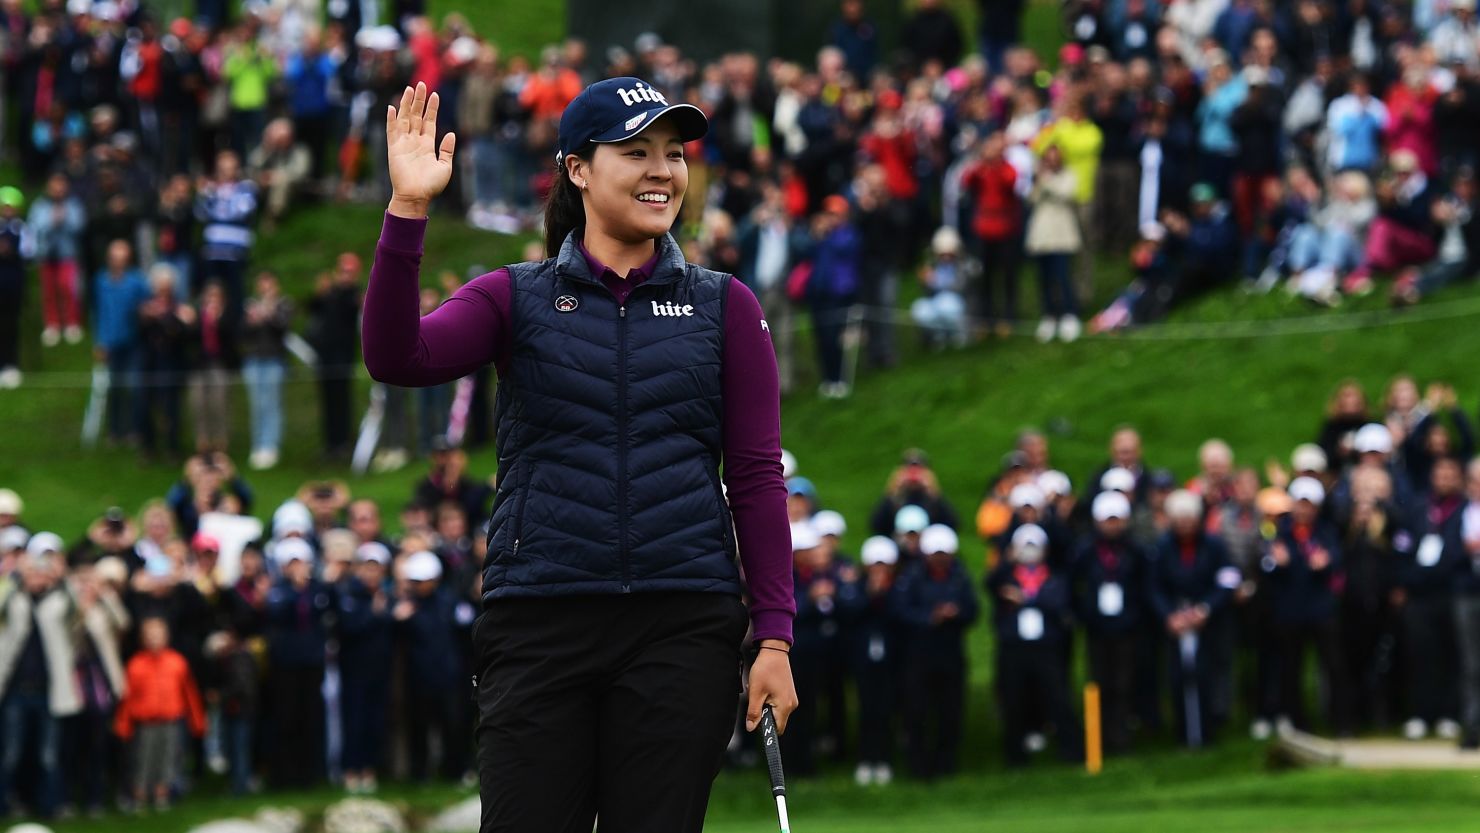 In Gee Chun celebrates after holing the winning putt at Evian-les-Bains to claim her second major title.